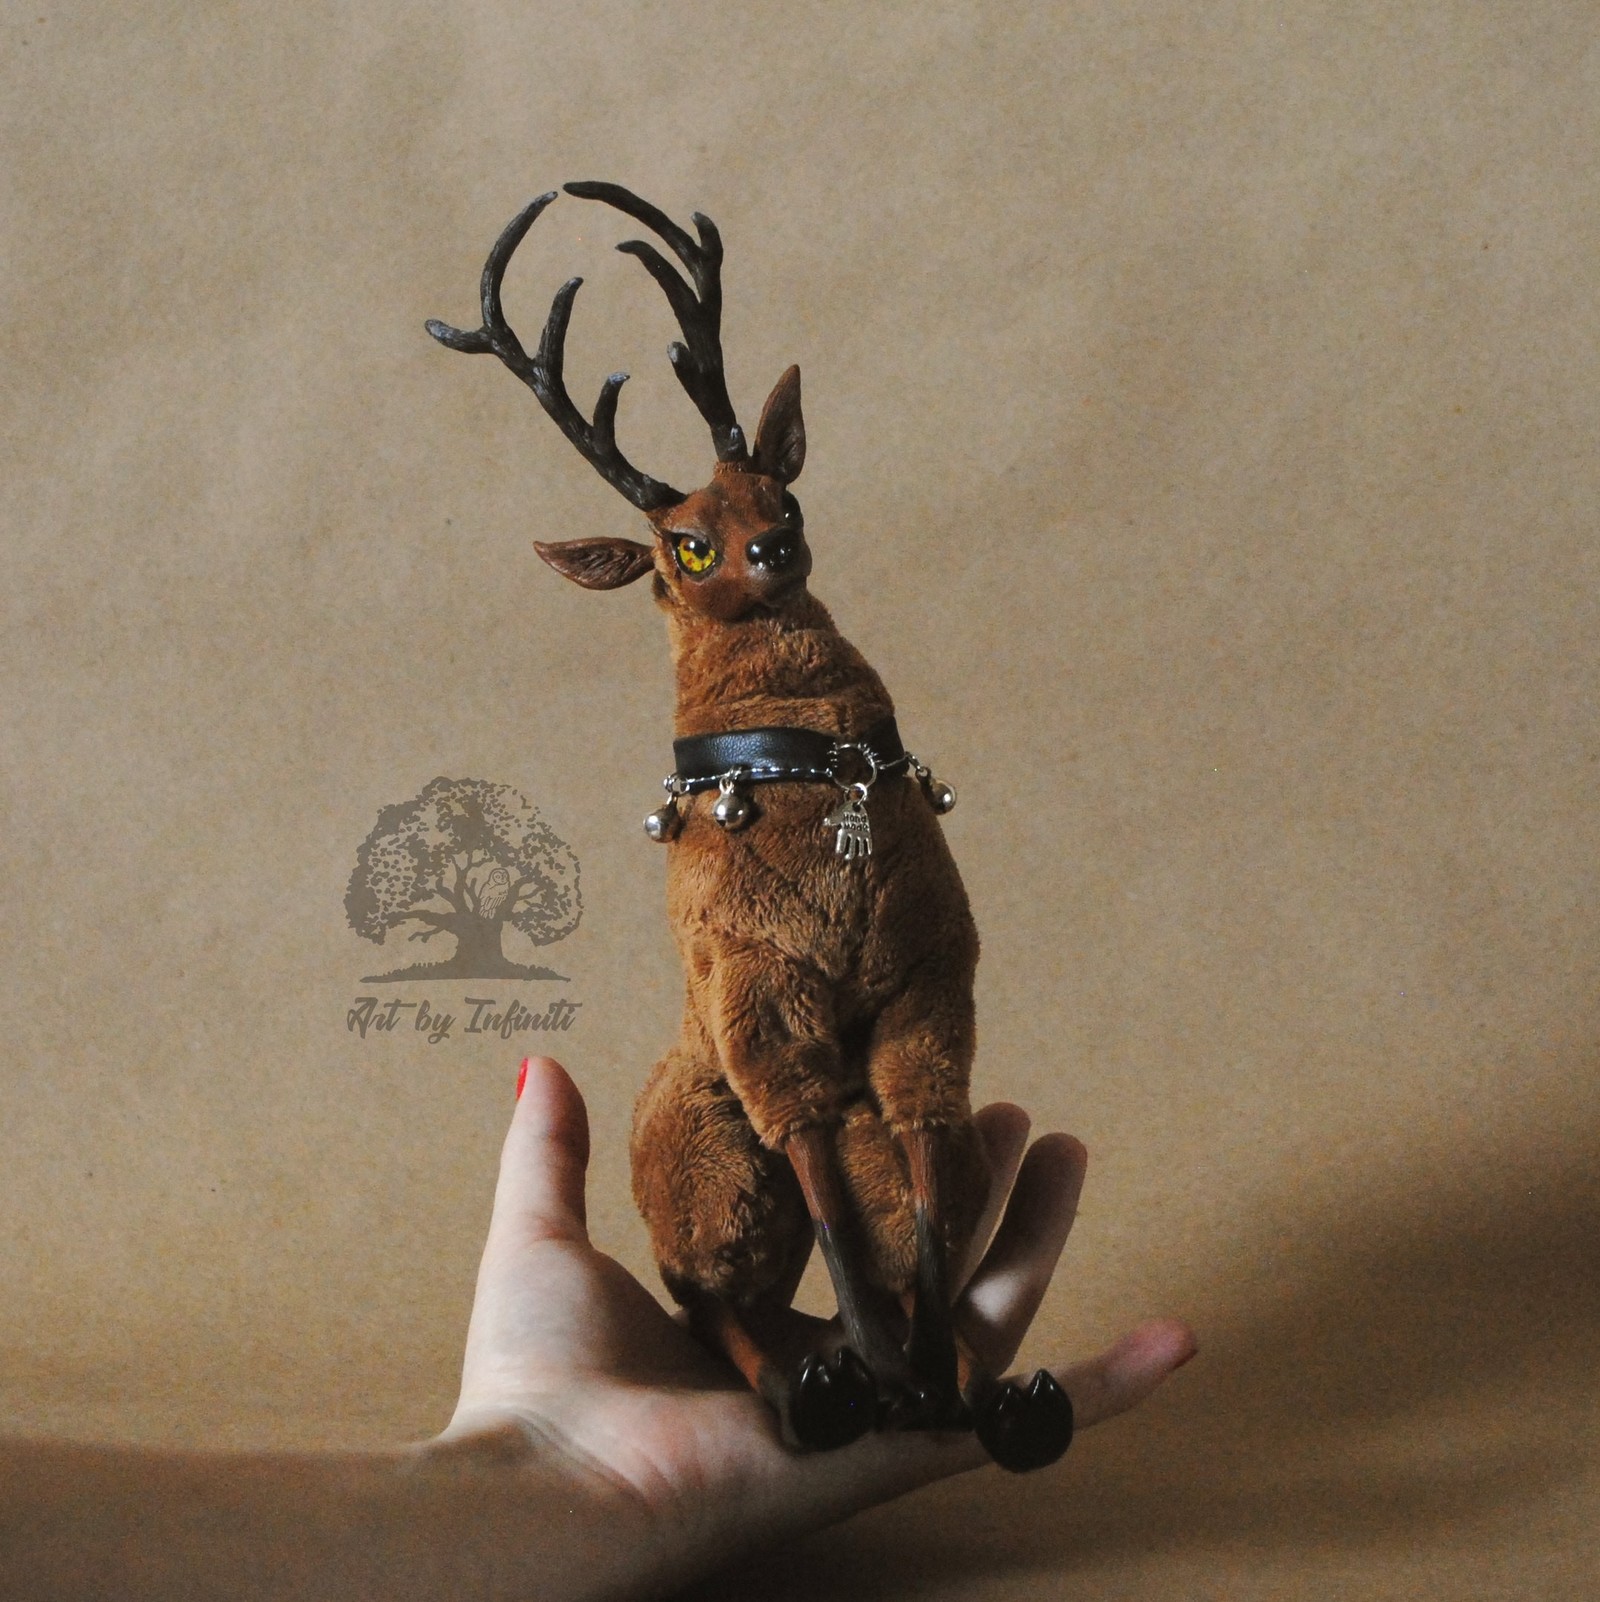 Get your sleigh ready in the summer!) Christmas Reindeer Compilation - My, Deer, Polymer clay, Author's toy, Christmas, New Year, Presents, Longpost, Deer